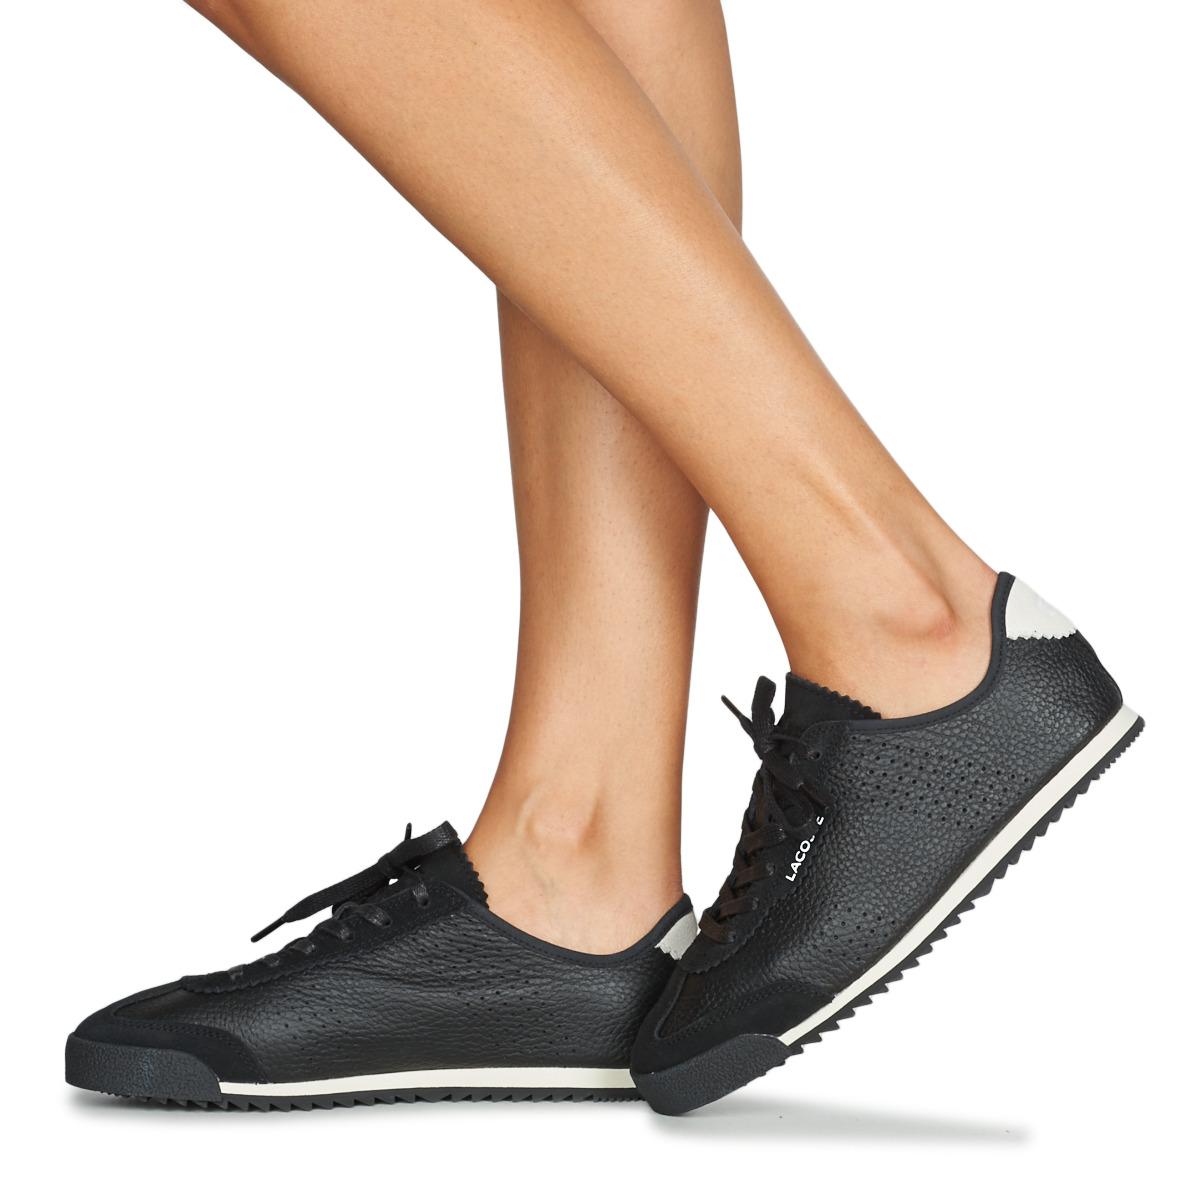 Lacoste Ascenta 0120 1 Cfa Shoes (trainers) in Black | Lyst UK